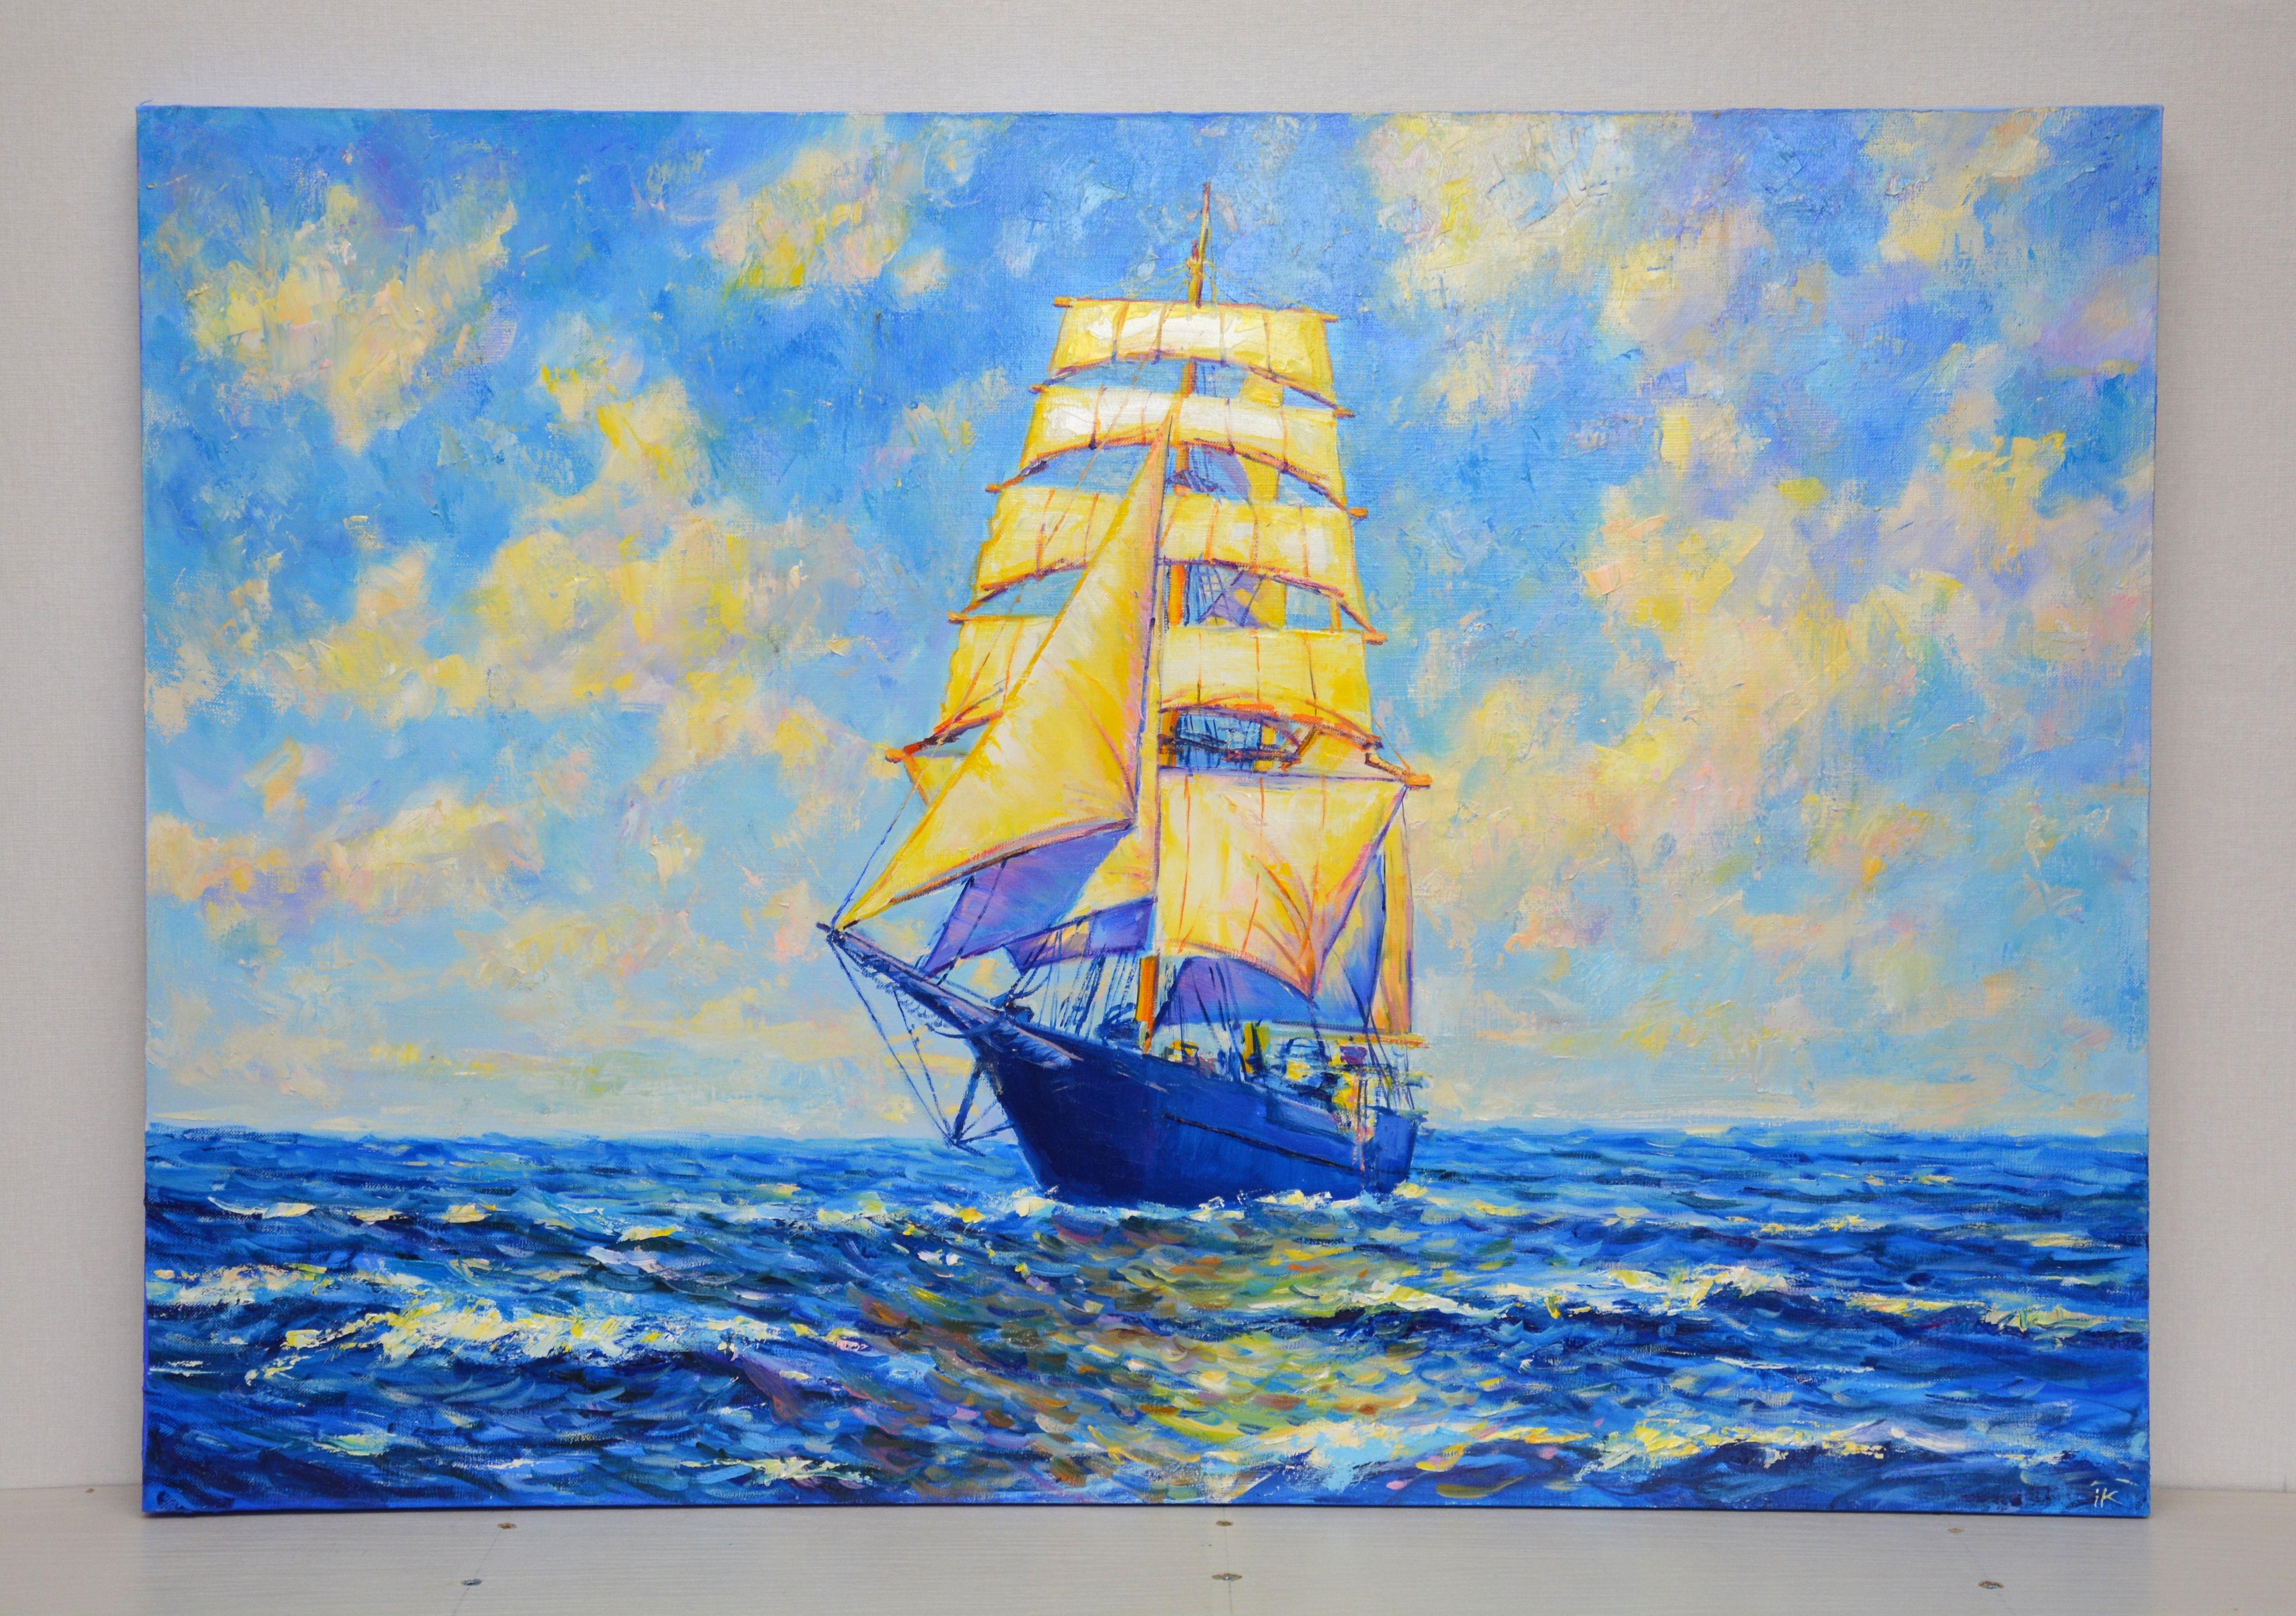 Painting In full sail. Sea, seascape, ocean, waves, blue, turquoise, vacation, romance, impressionism, realism, water, painting, sea foam, sea wave, beach, sun glare, ship, sea voyage, ship, yacht. Oil painting on linen canvas. The sides are painted